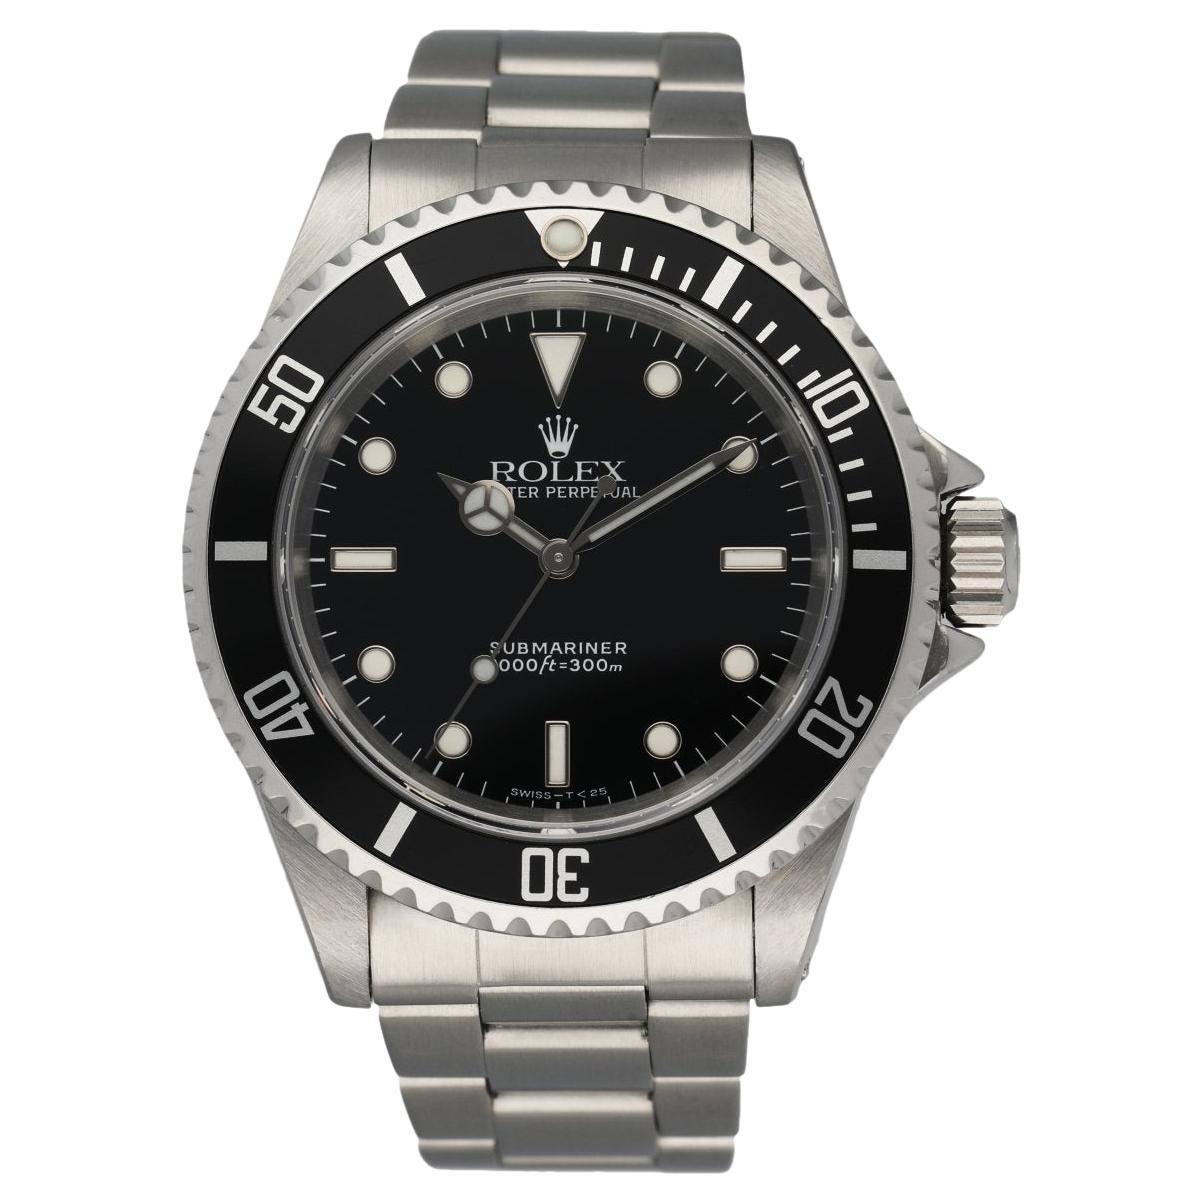 Rolex Oyster Perpetual Submariner 14060 No Date Men's Watch